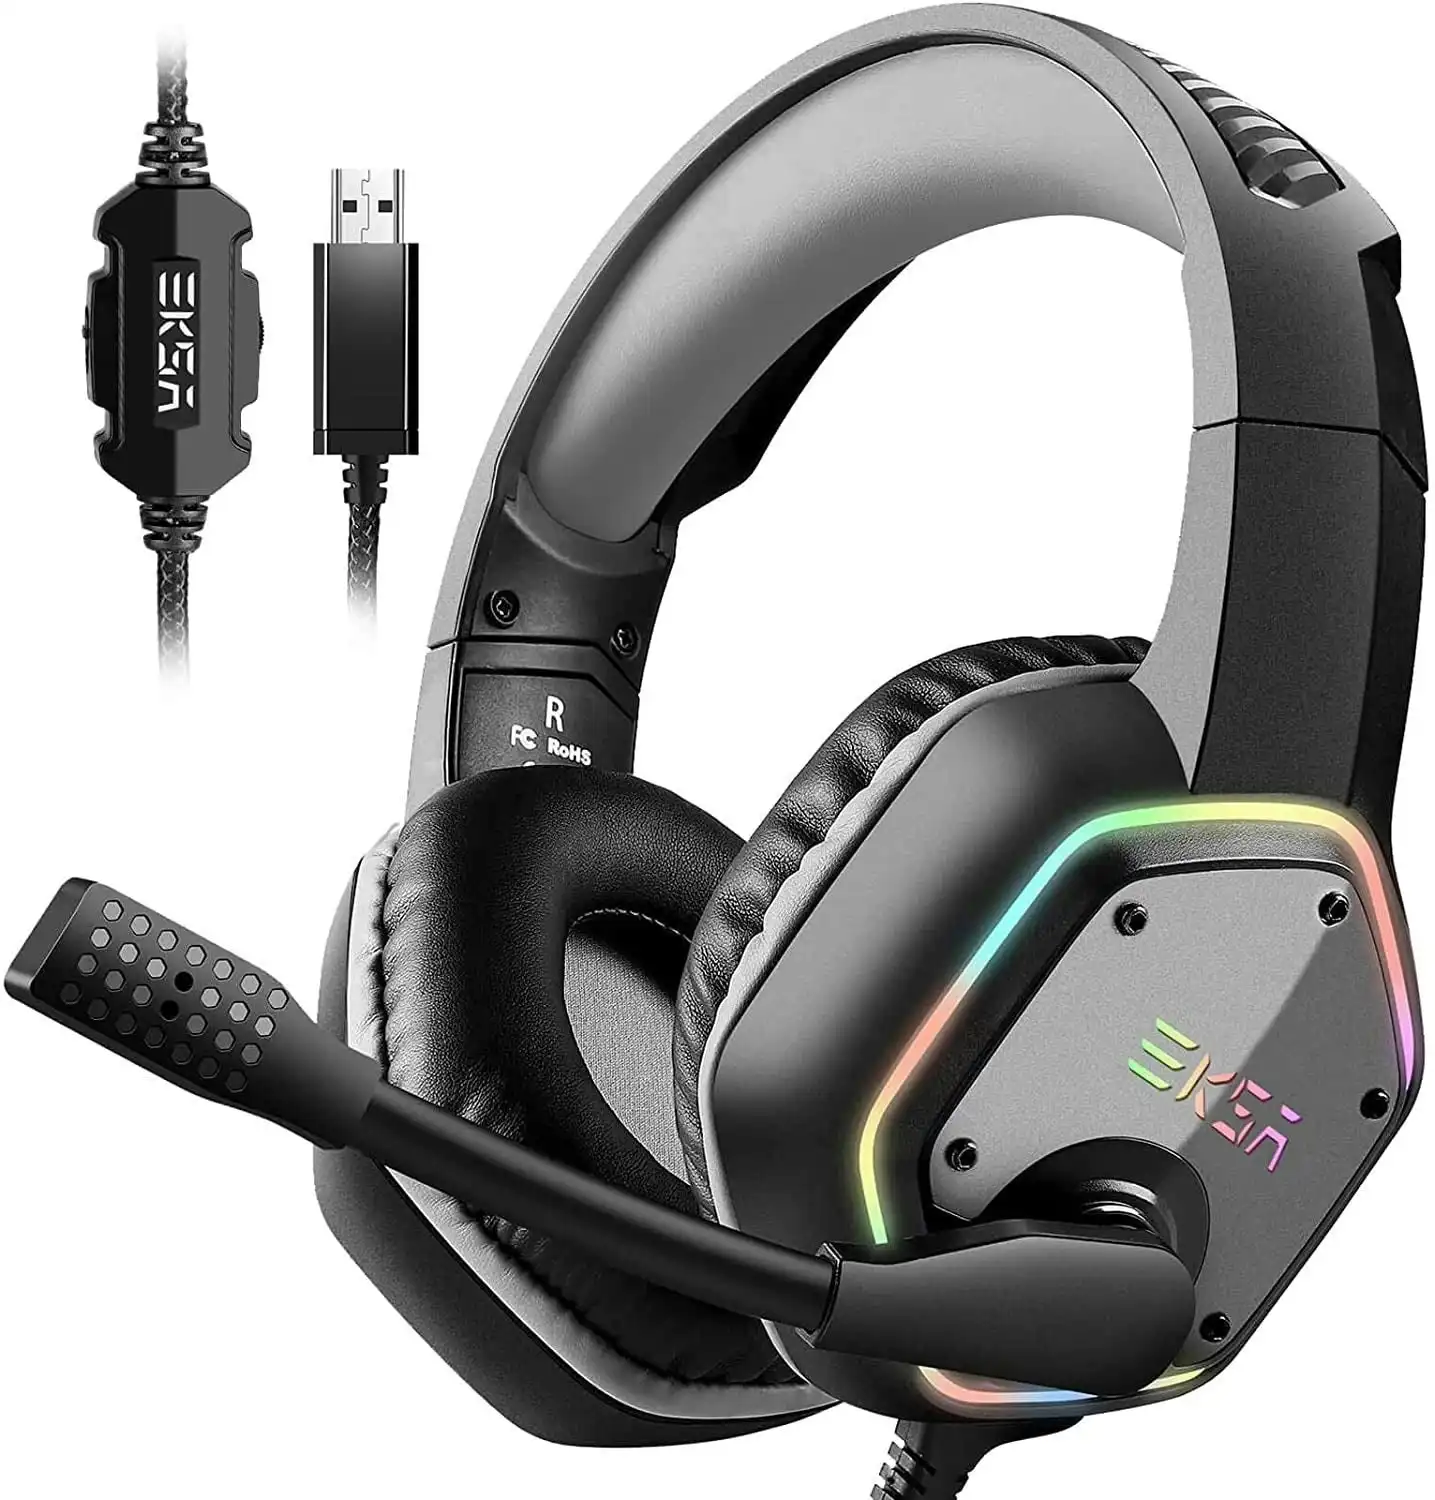 EKSA E1000 USB Gaming Headset for PC - Computer Headphones with Microphone/Mic Noise Cancelling, 7.1 Surround Sound Wired Headset&RGB Light - Gaming H